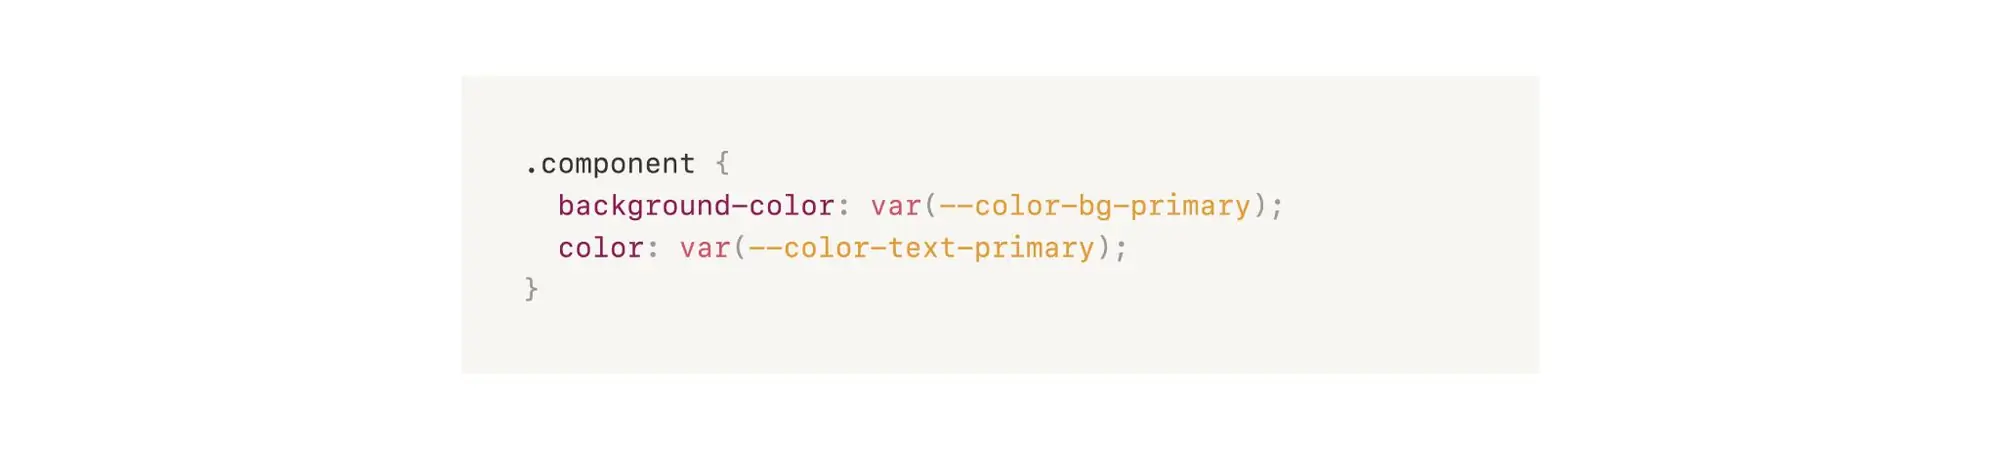 Image of code applying the colors to components